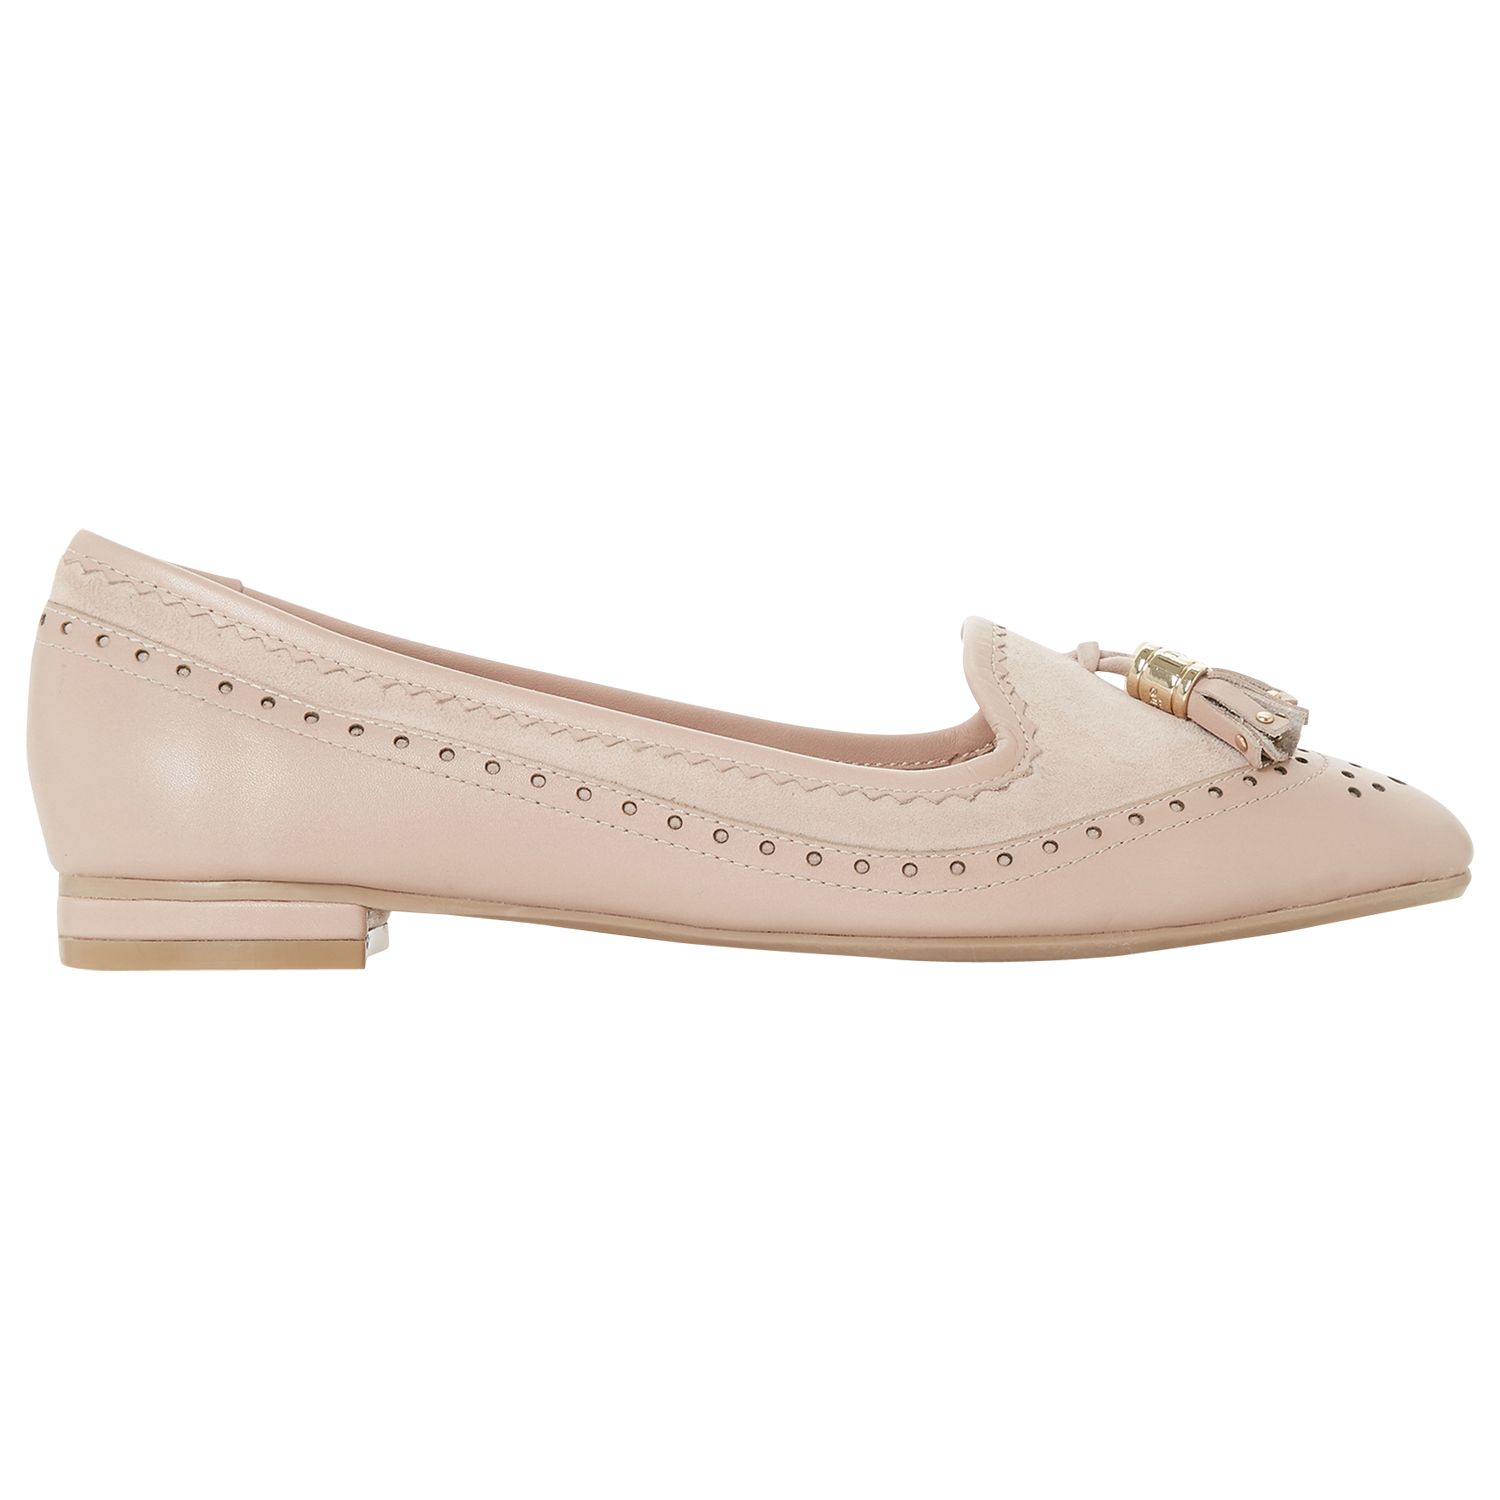 Dune Gambie Leather Loafers, Blush, 5